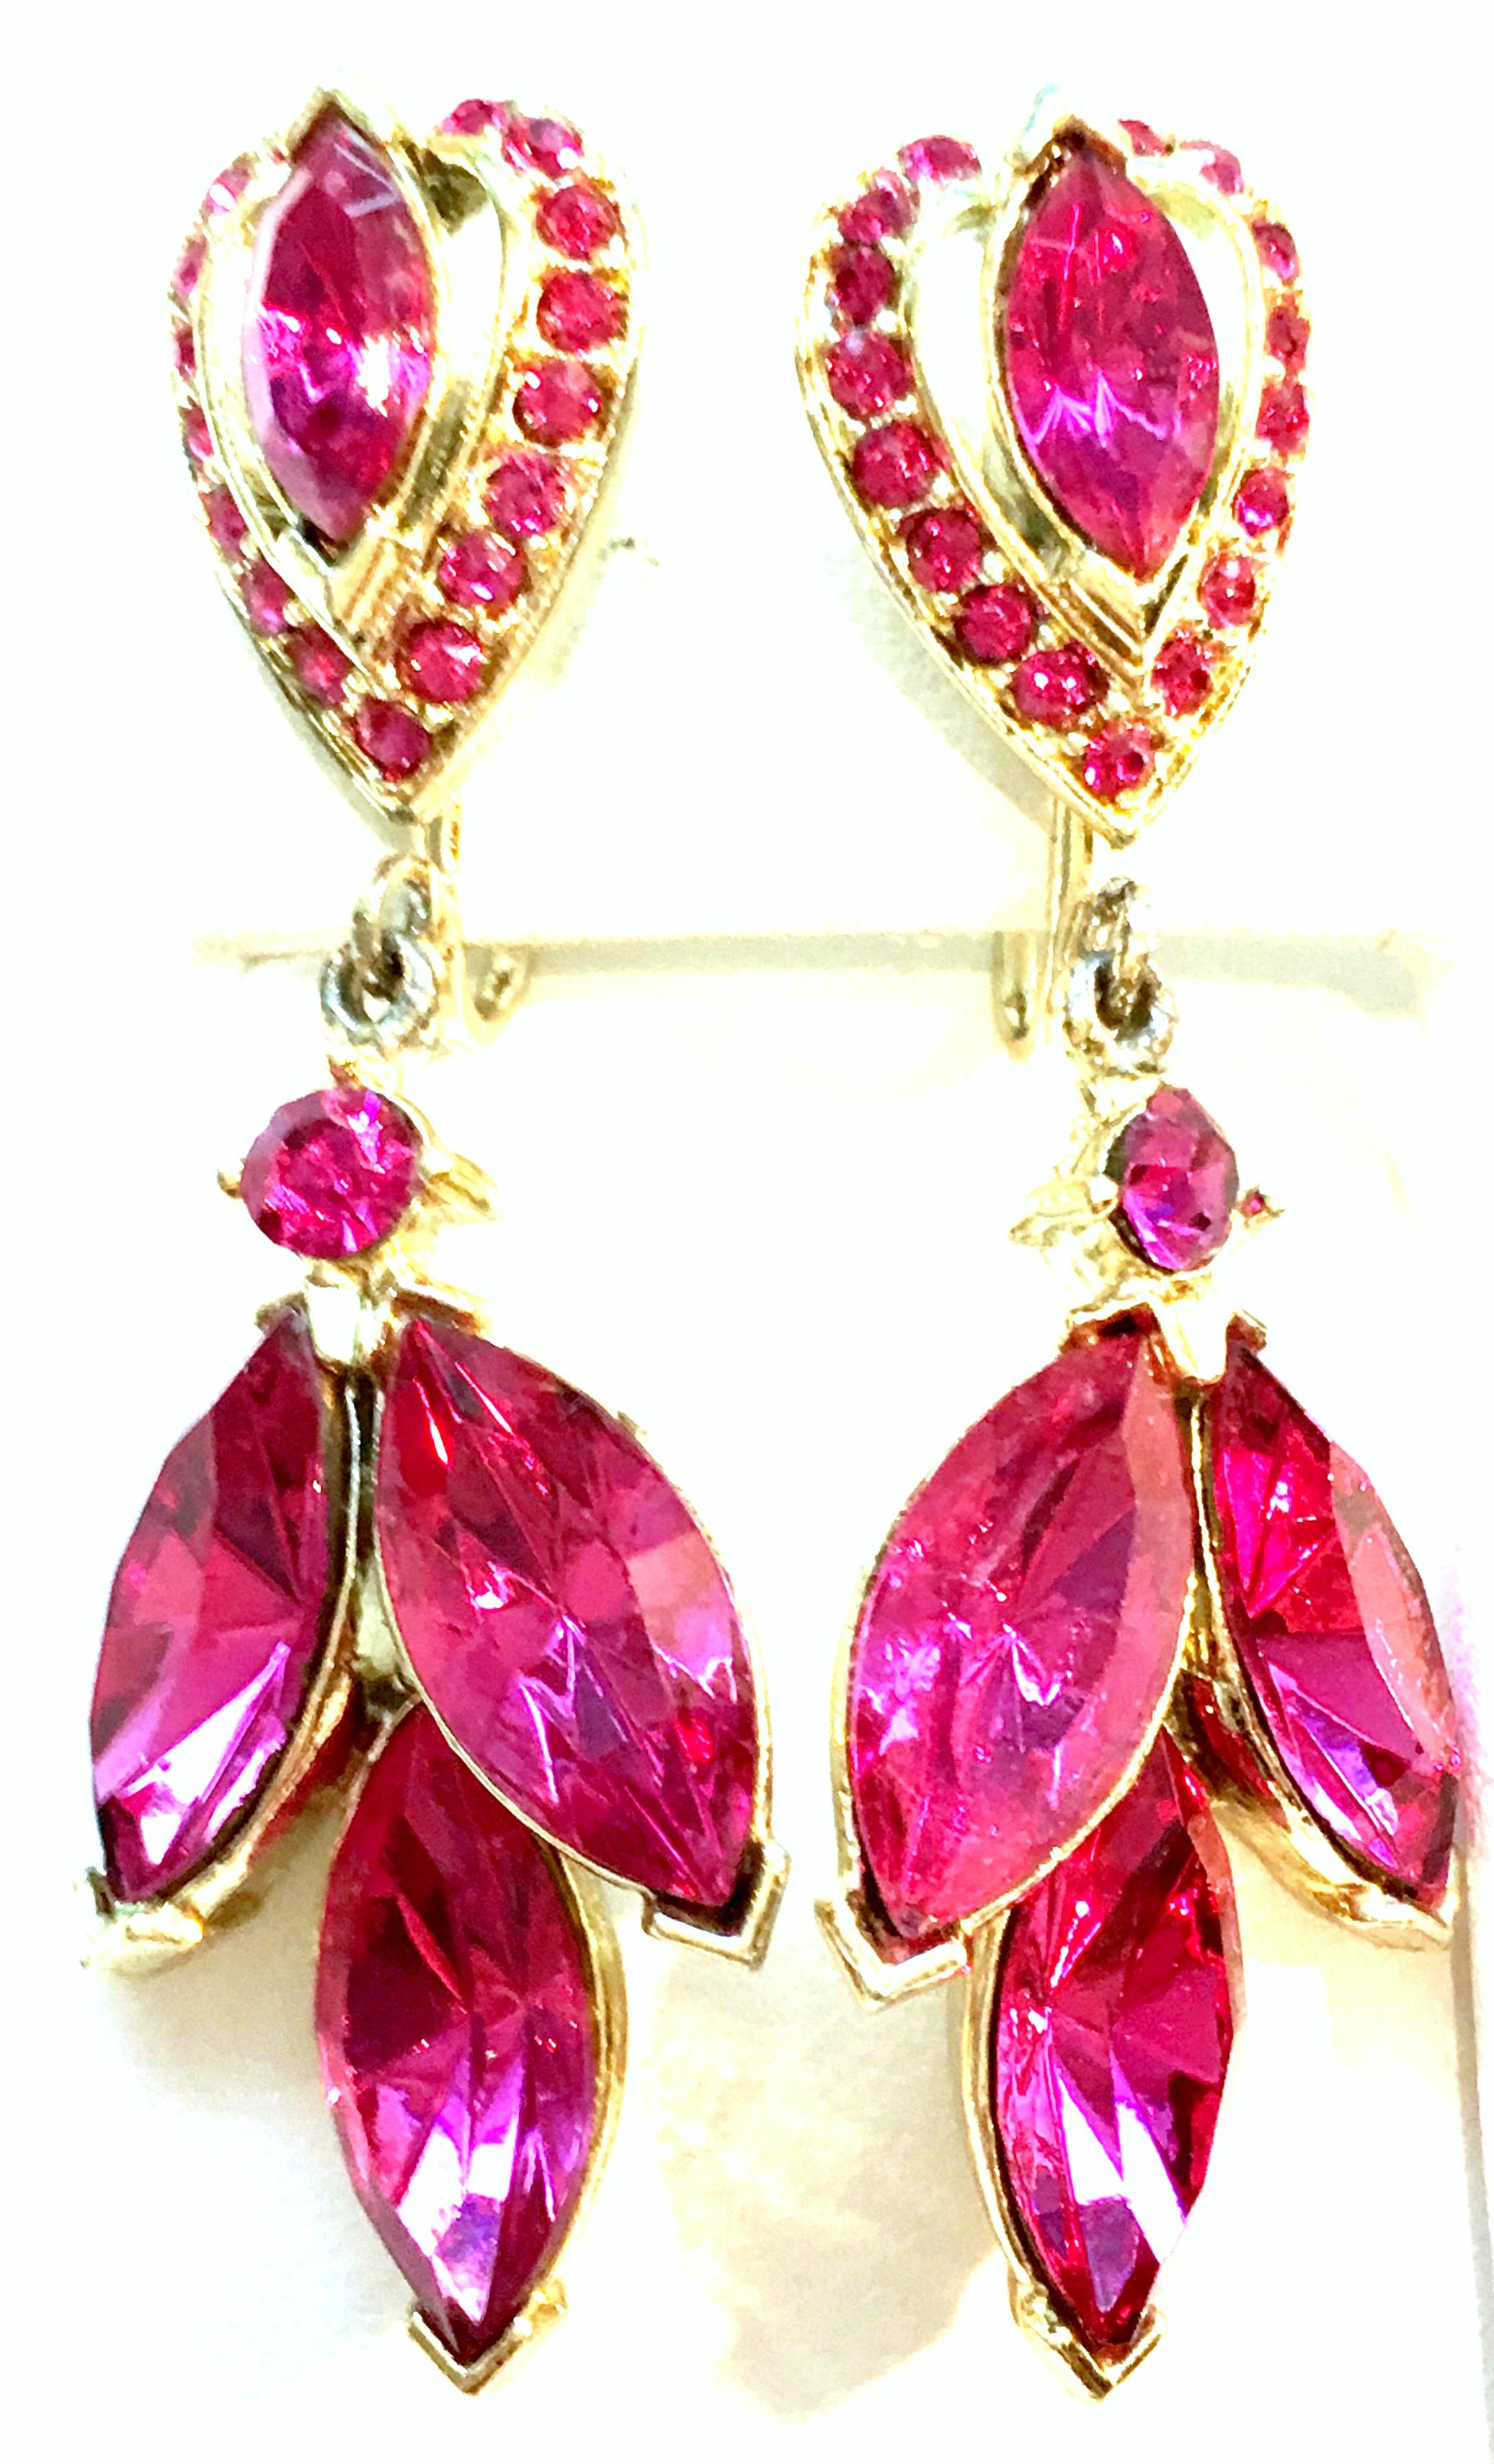 20th Century Pair Of Gold Plate & Swarovski Crystal Drop Earrings. These finely crafted clip style drop earrings feature gold plate with fancy prong set faux pink sapphire Swarovski crystal stones. There is an abstract heart form at the post and